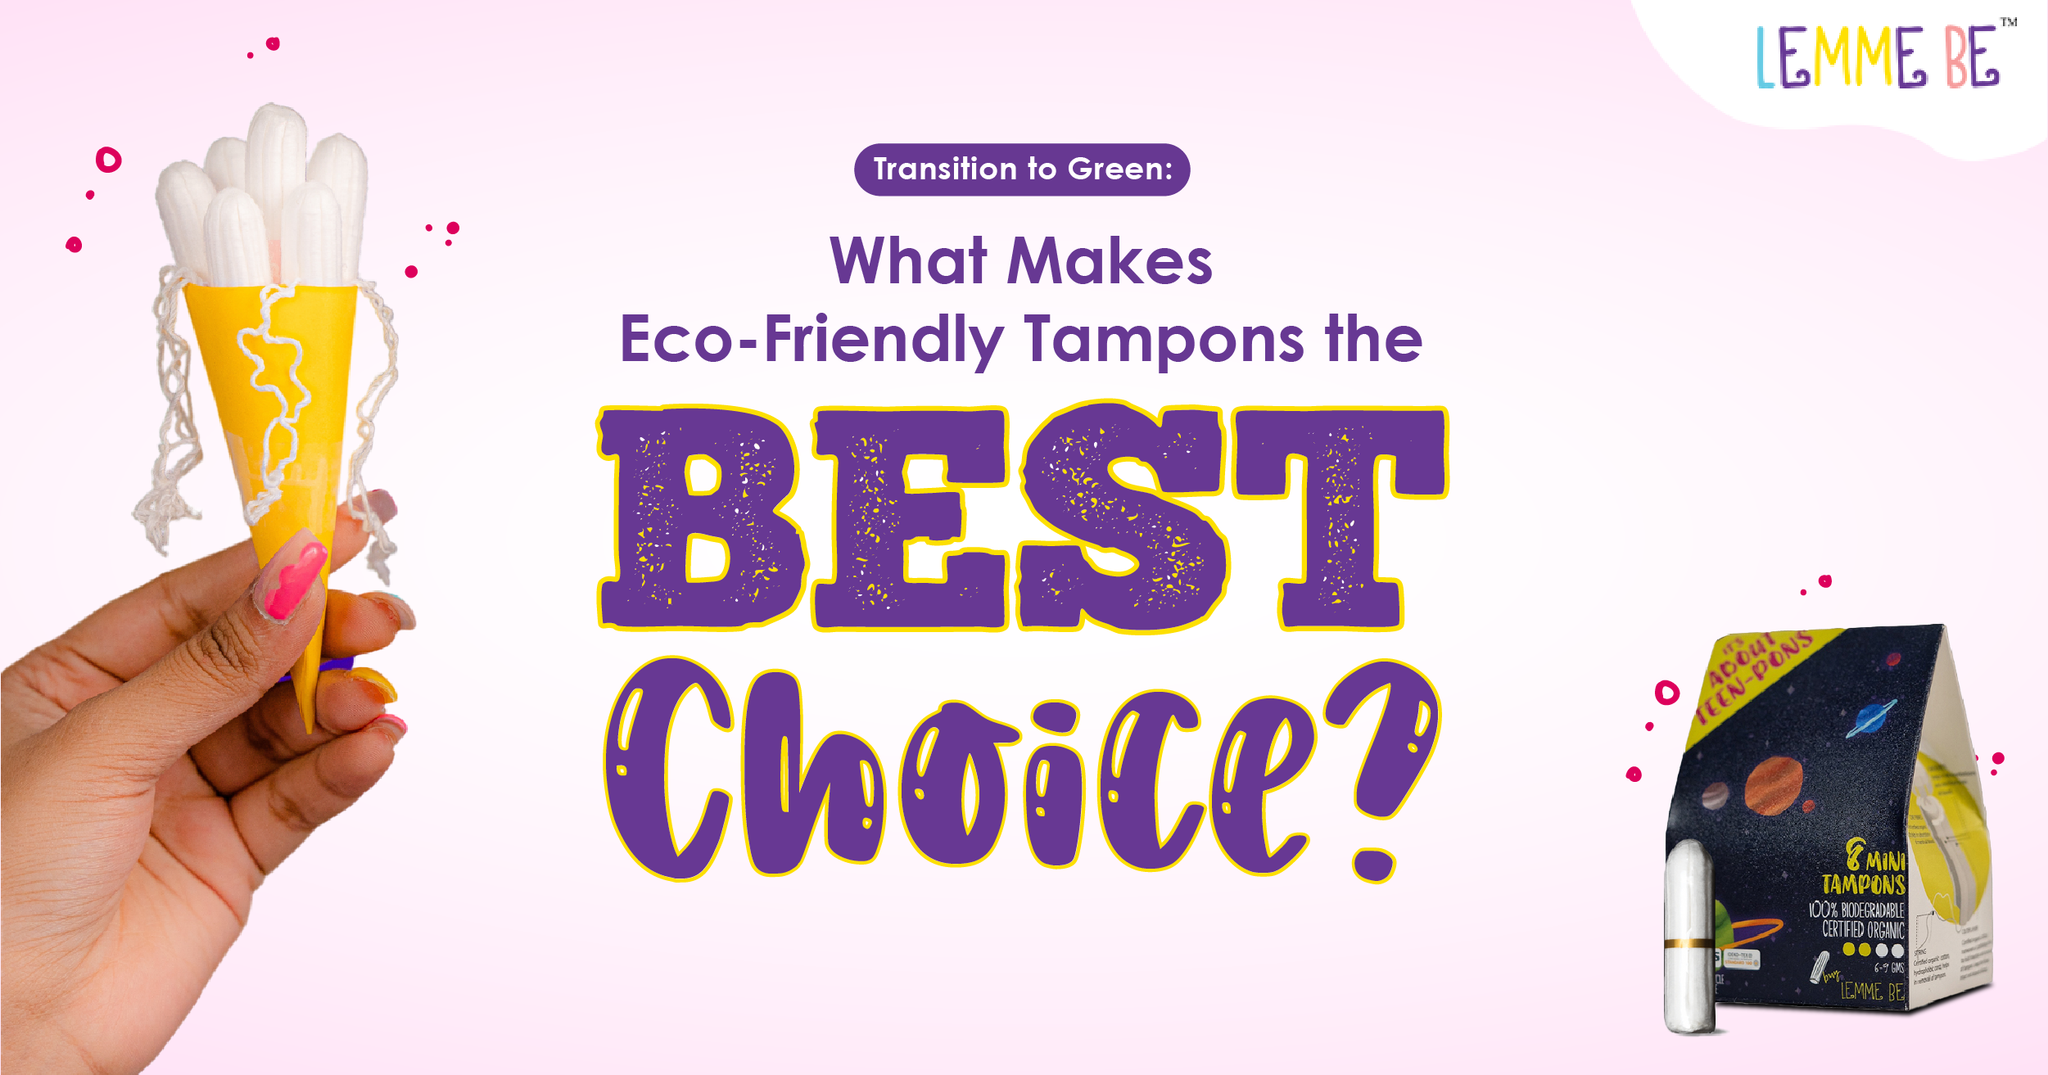 Transition to Green: What Makes Eco-Friendly Tampons the Best Choice?